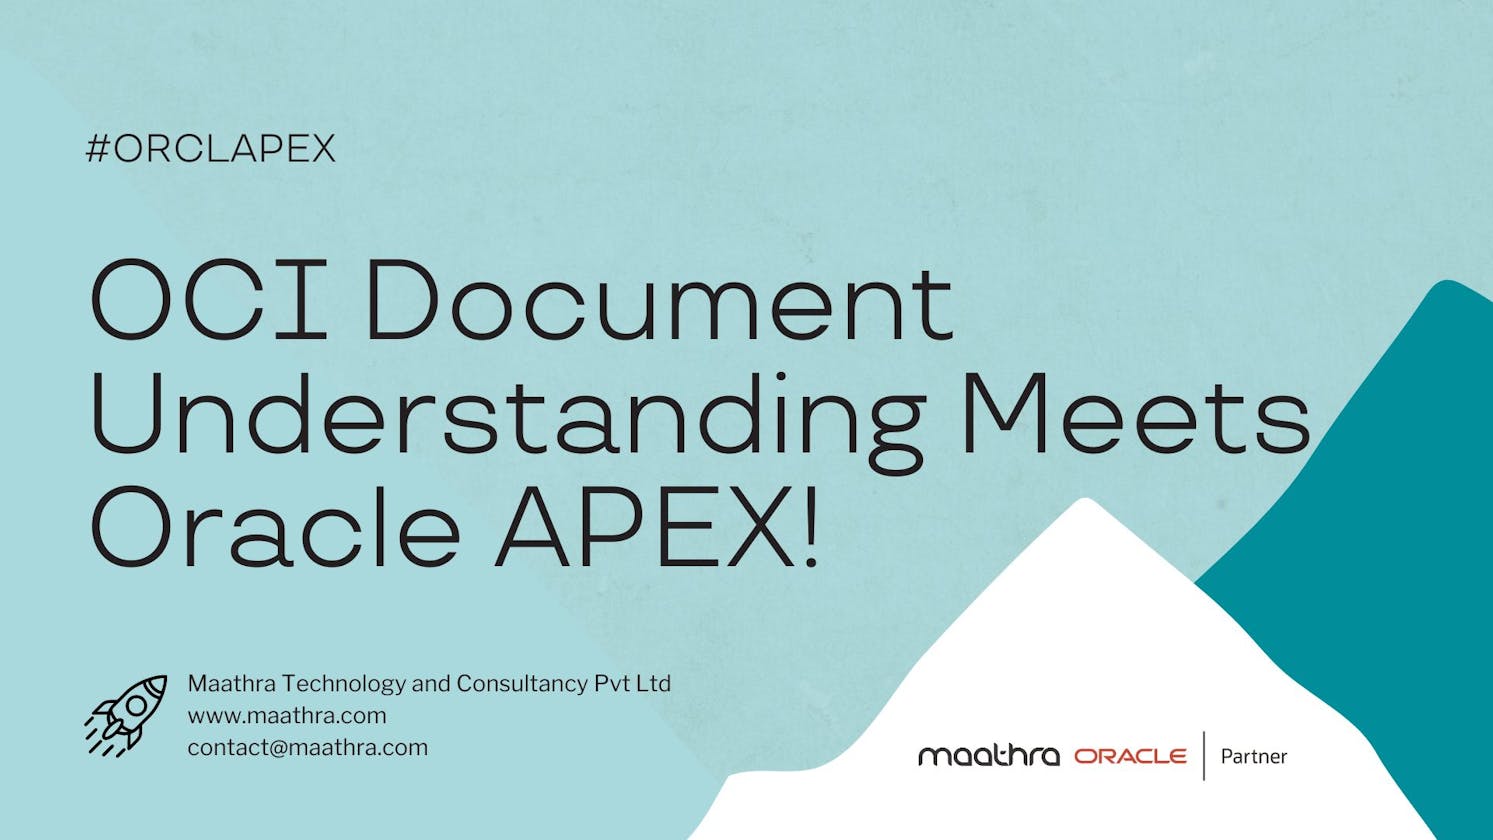 Transforming Document Processing: OCI Document Understanding Meets Oracle APEX!